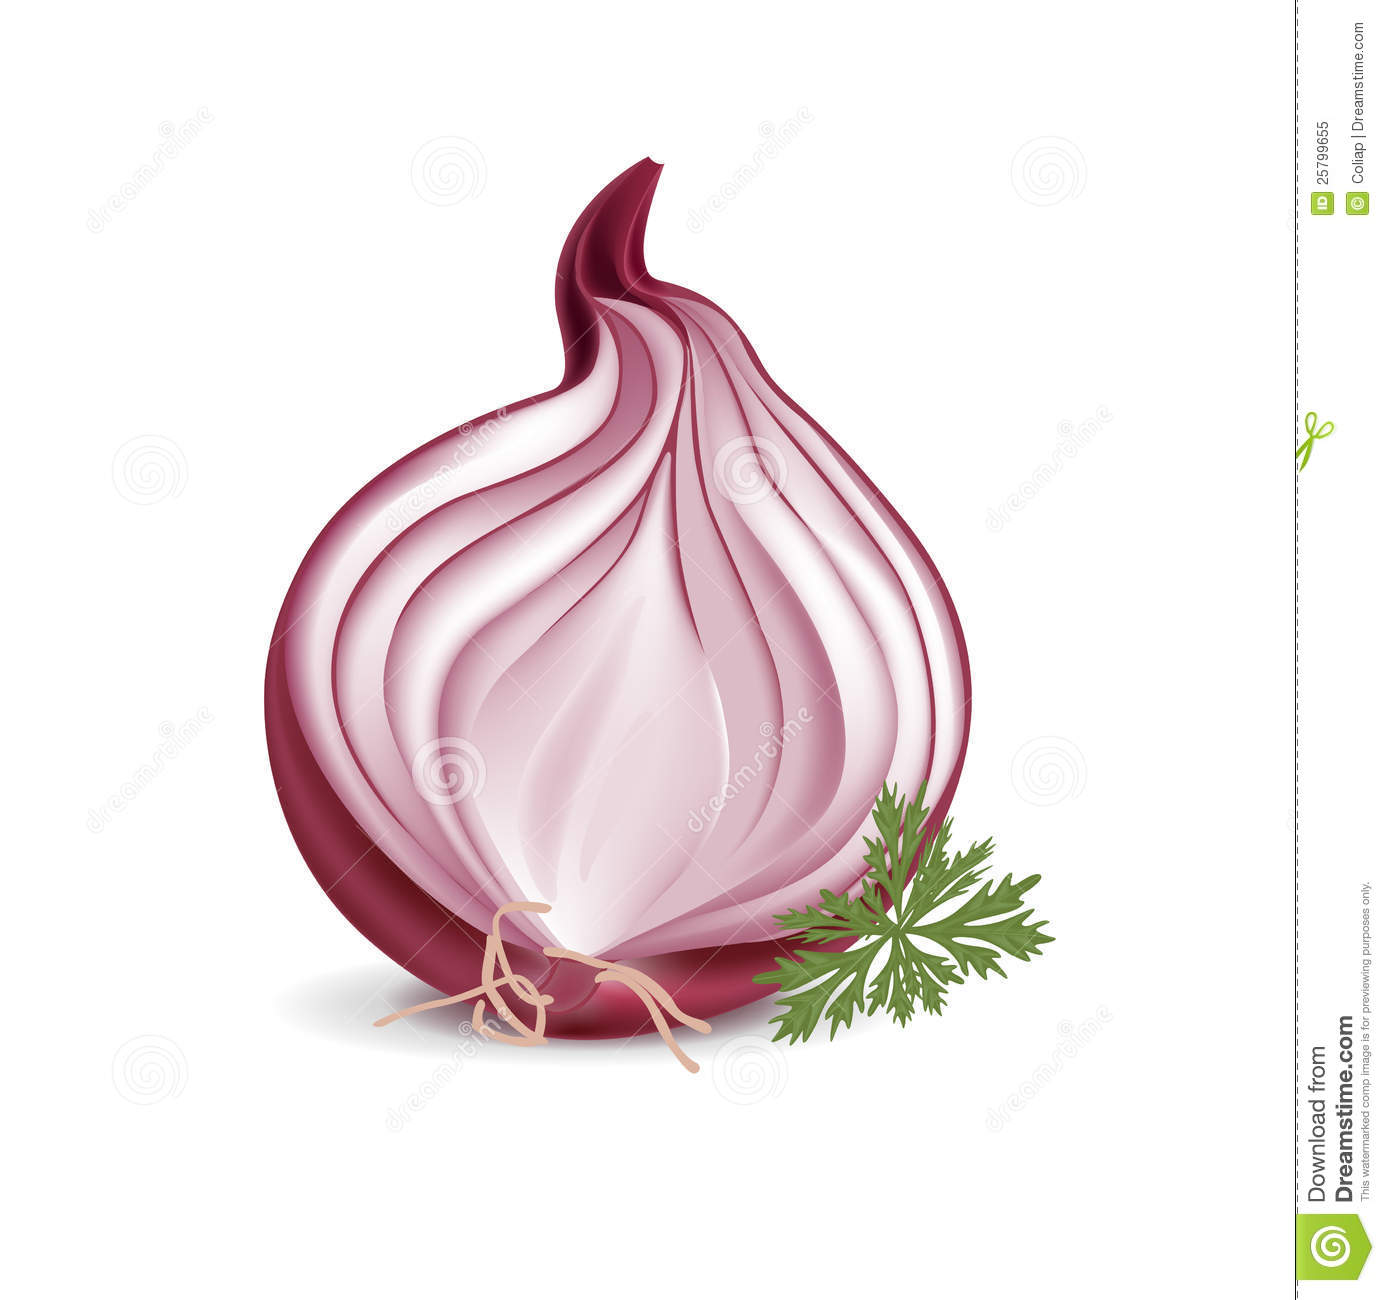 Sliced Red Onion With Parsley Royalty Free Stock Photo   Image